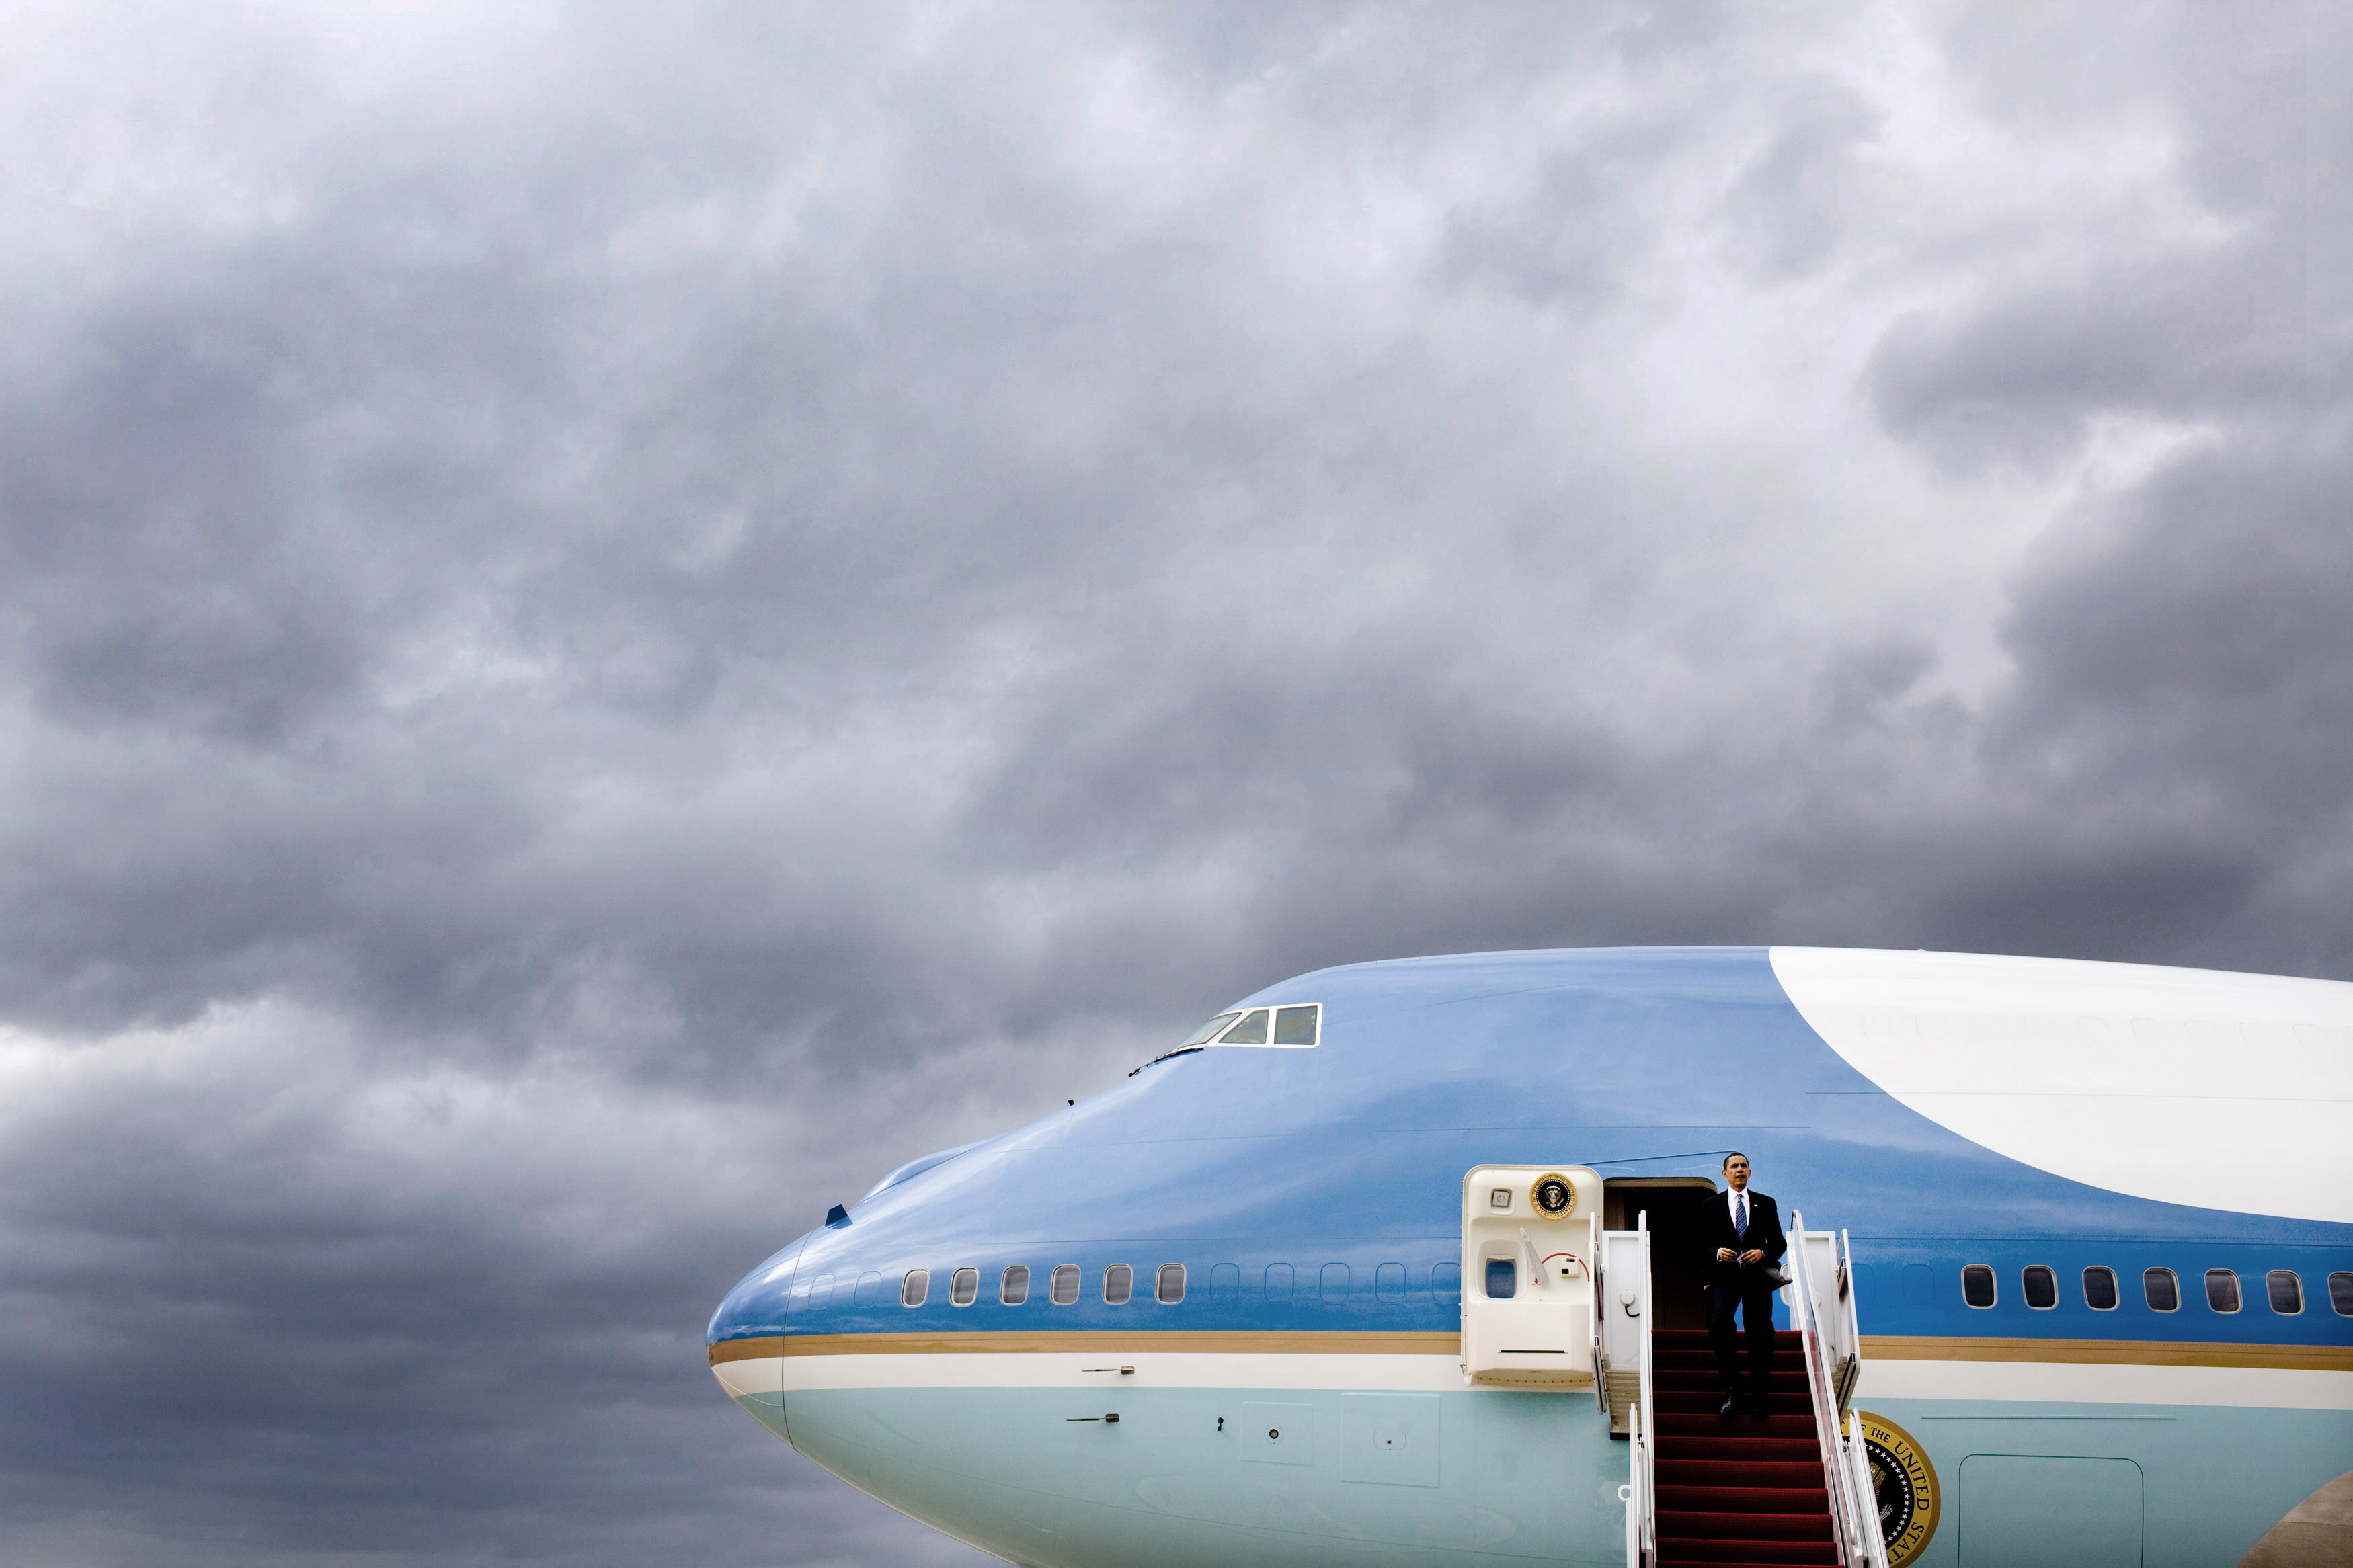 Barack Obama disembarks from Air Force One under a storm sky